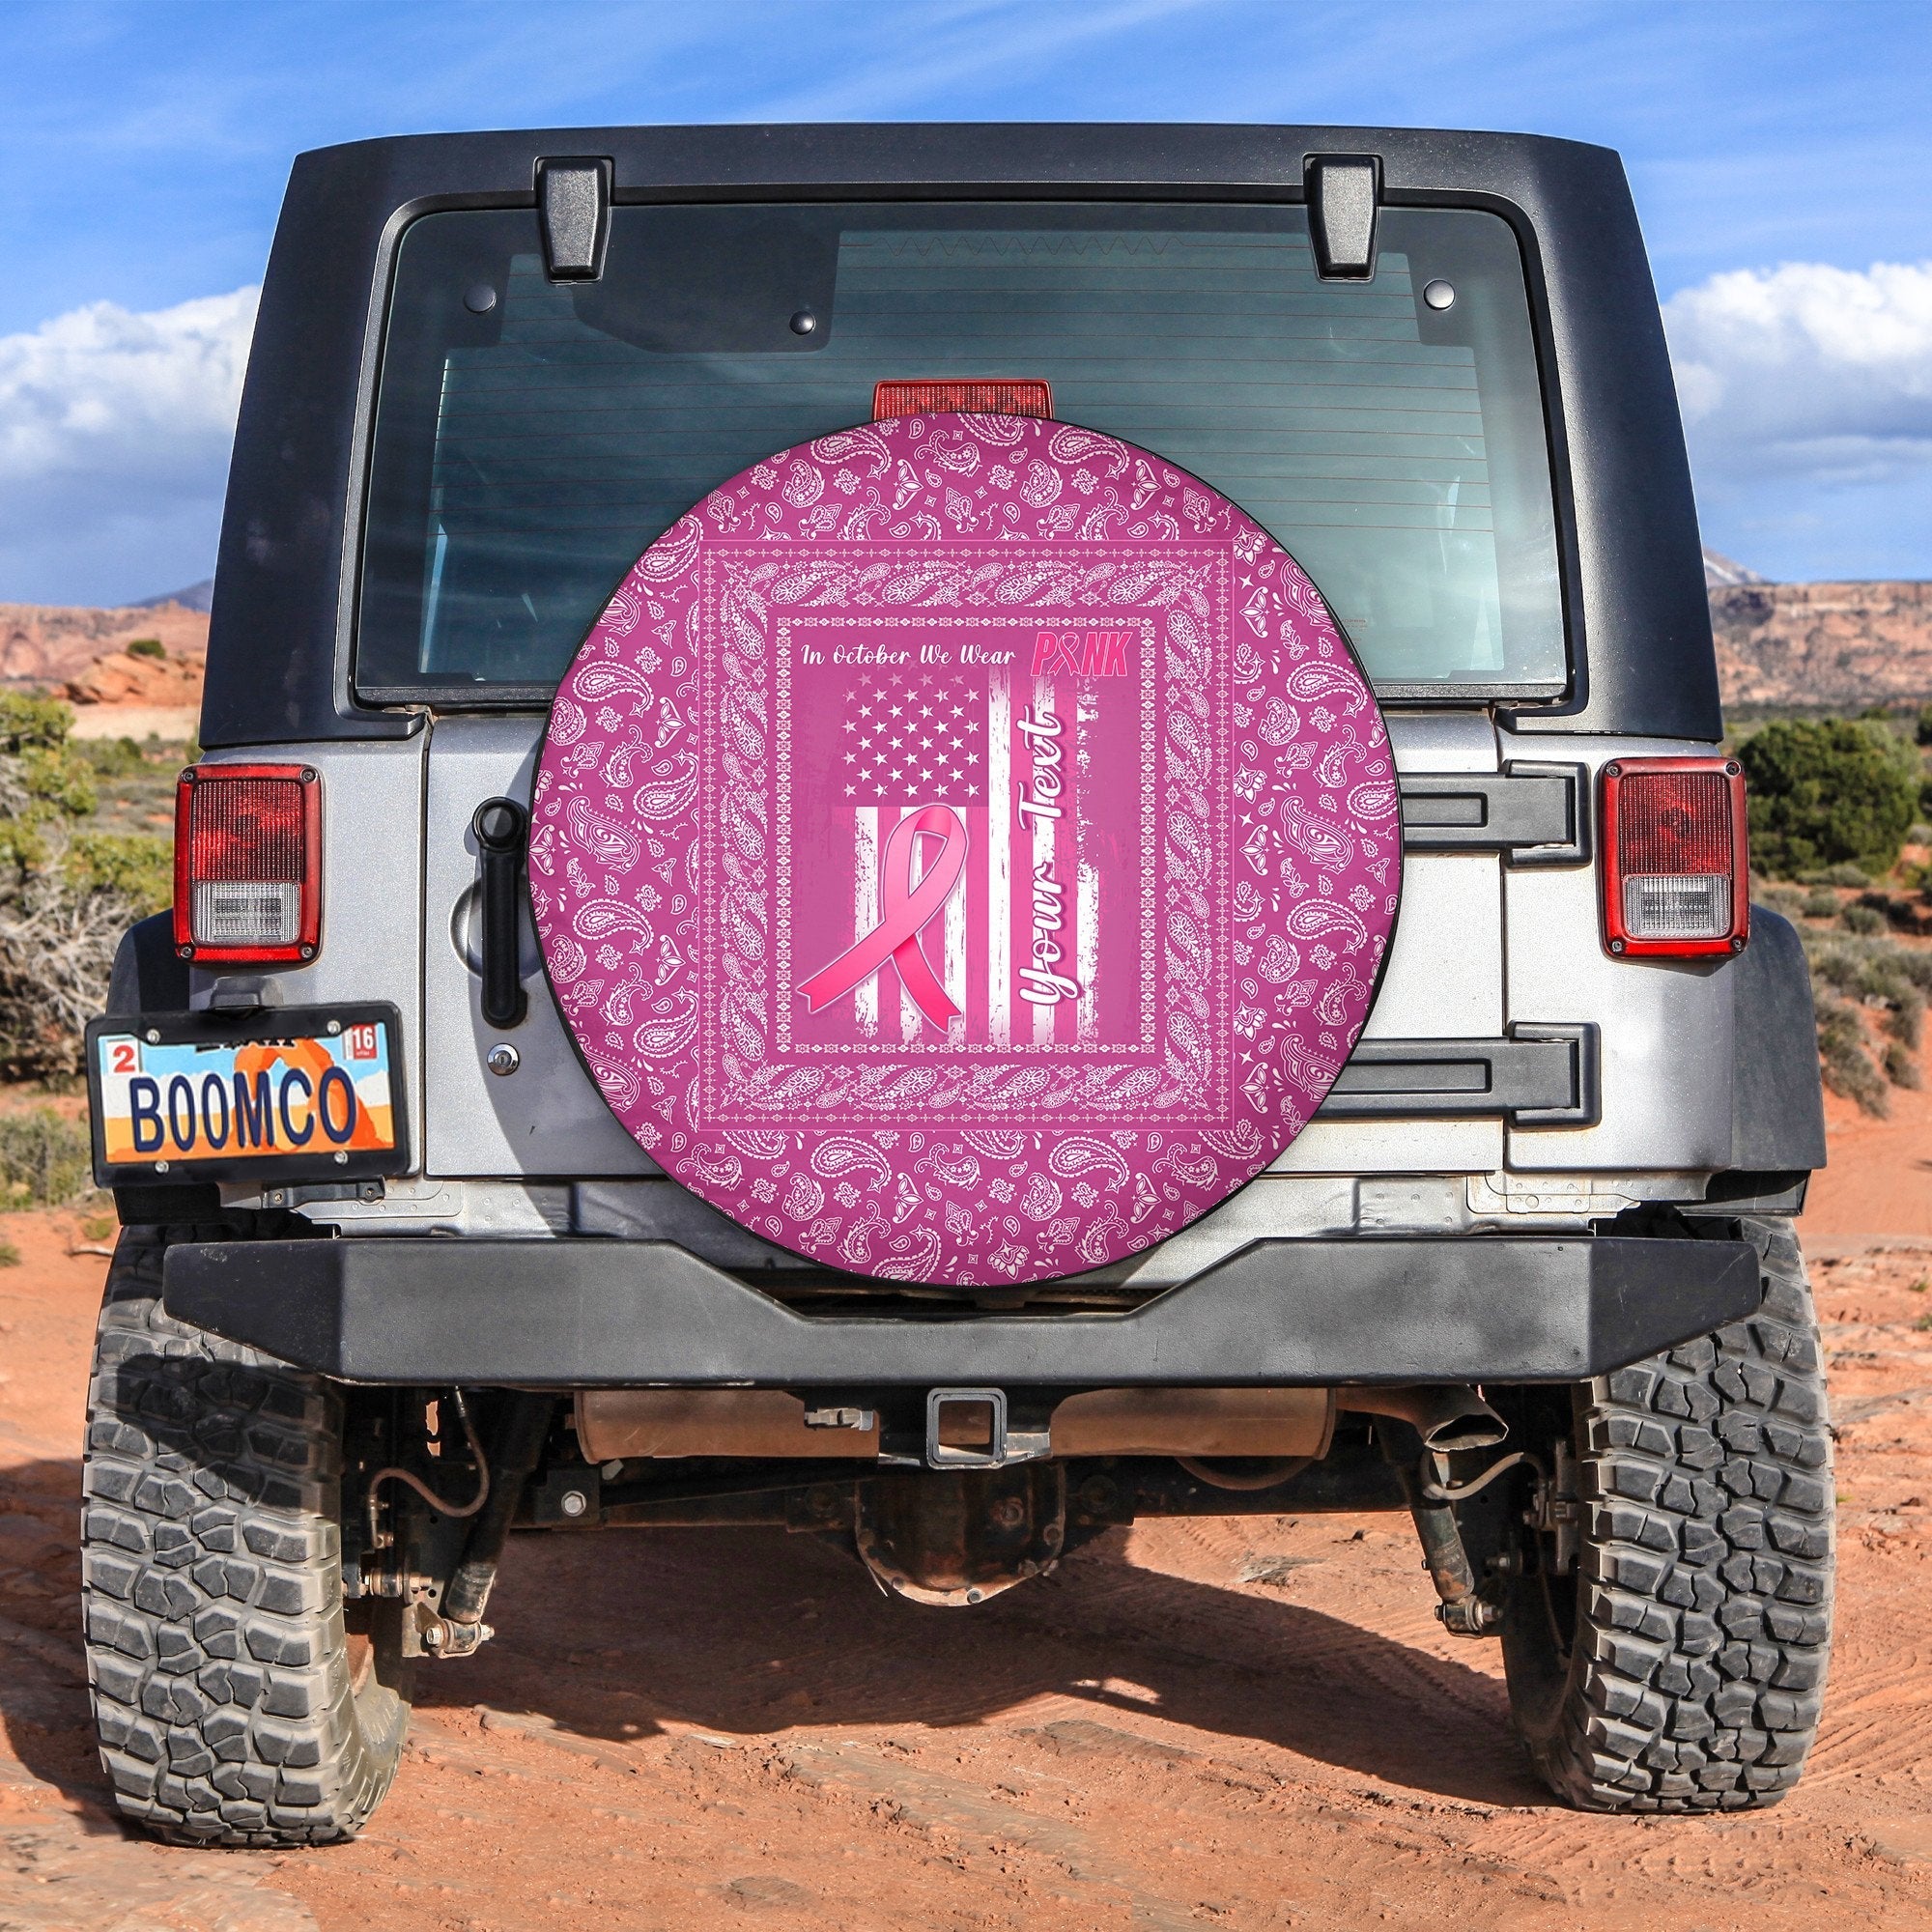 custom-personalised-breast-cancer-spare-tire-cover-pink-paisley-pattern-in-october-we-wear-pink